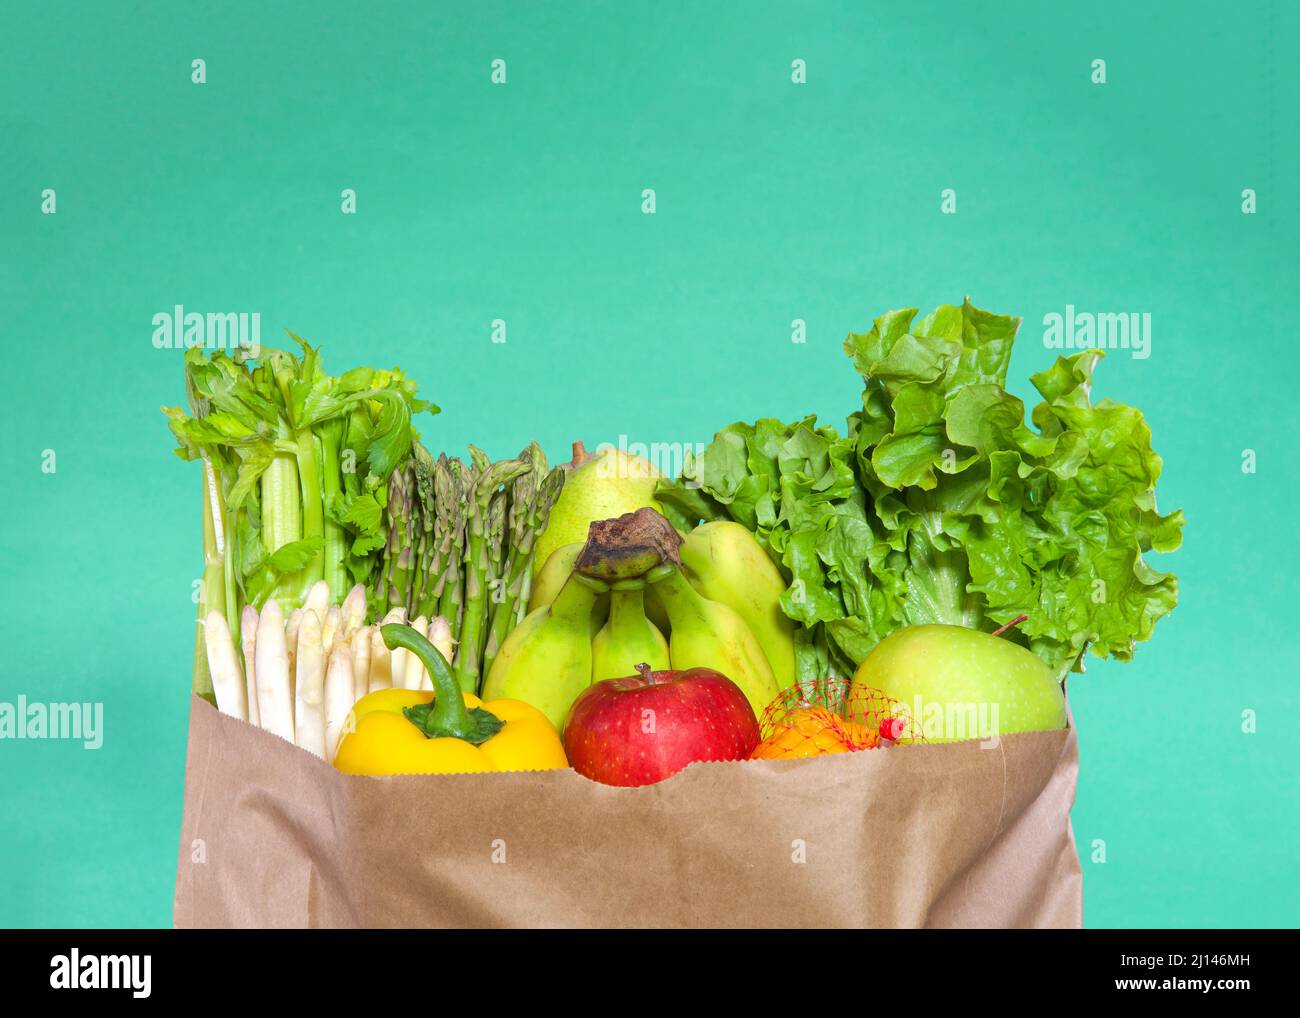 Top of brown paper grocery bag stuffed full with fruits and vegetables. Celery, white and green asparagus, bananas, lettuce, yellow bell pepper, red a Stock Photo